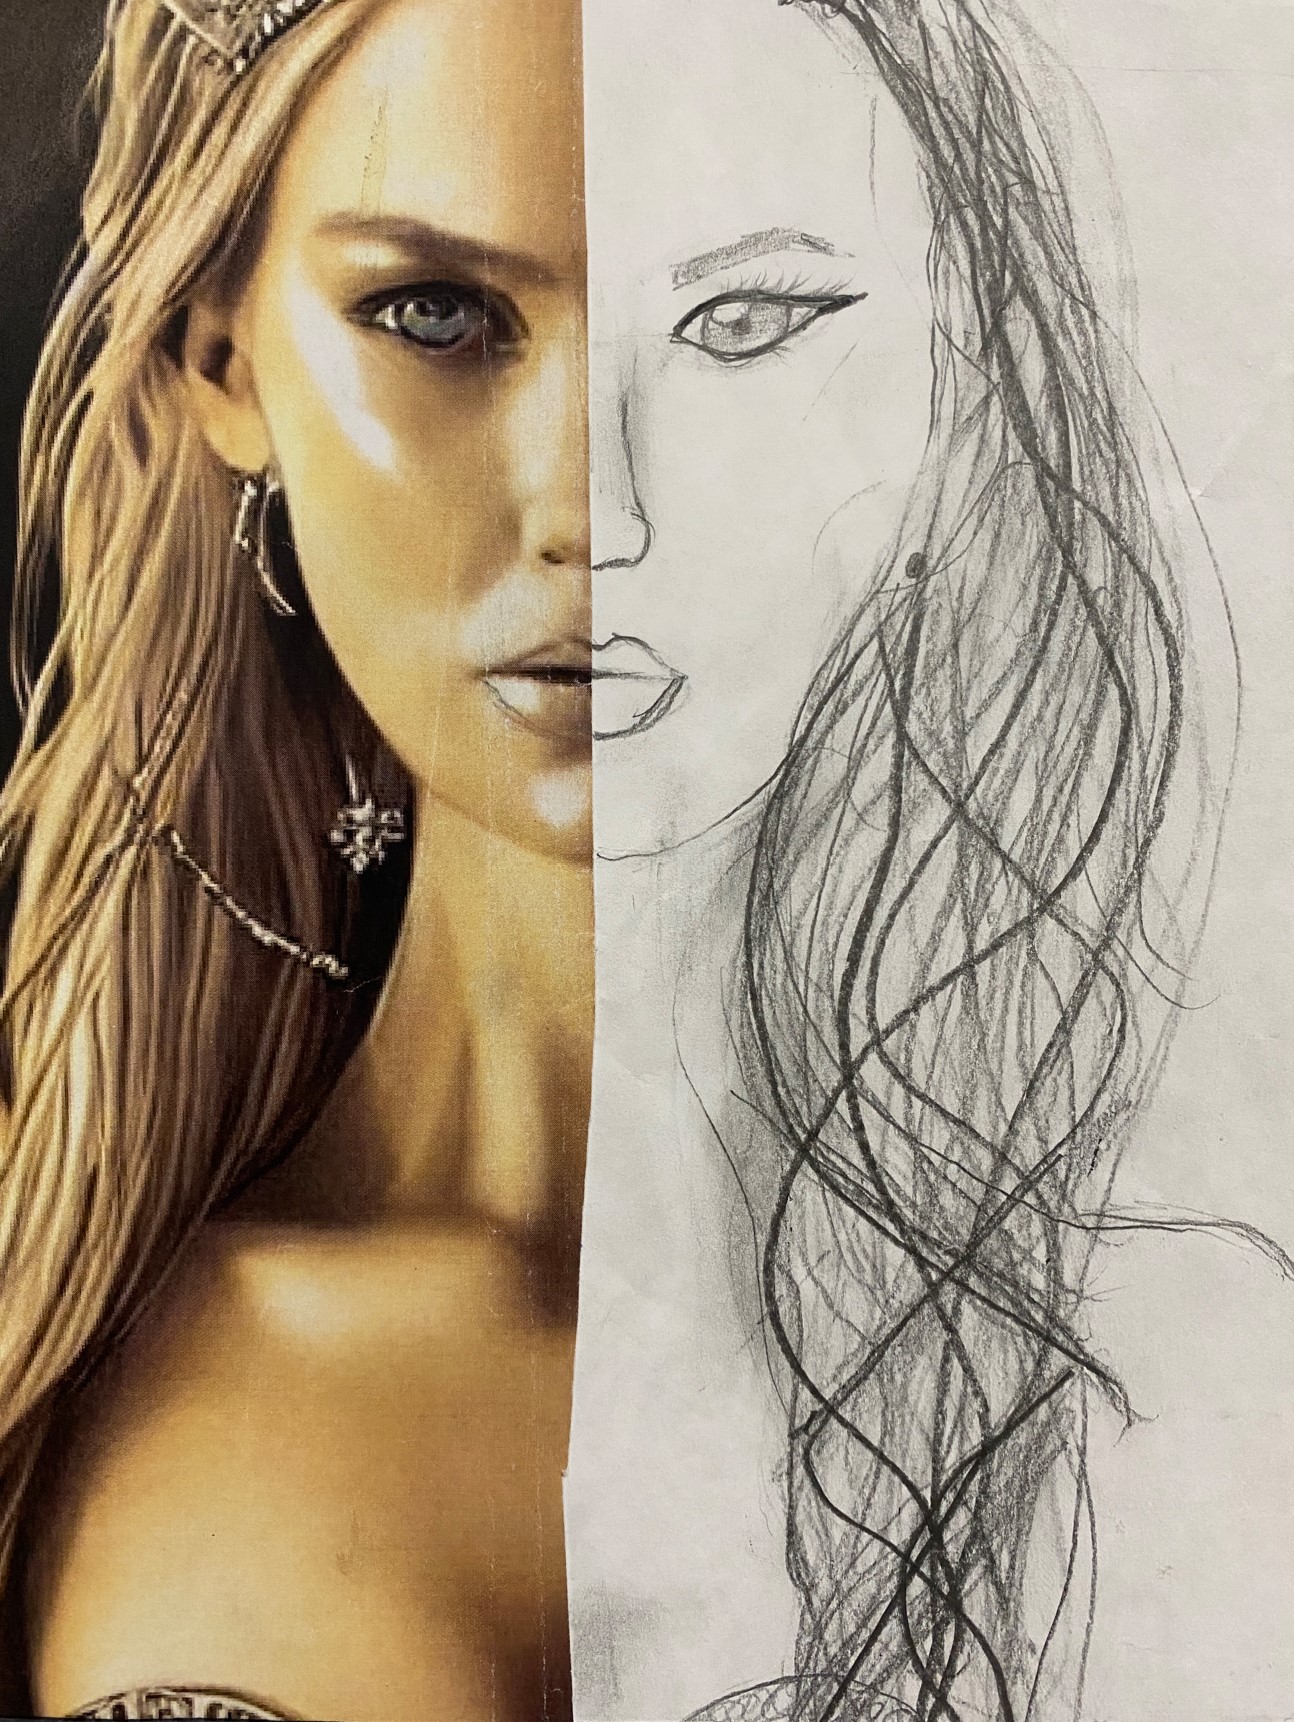 artwork depicting Jennifer Hawkins using half a photo of her and then pencil drawing of other half of her face.